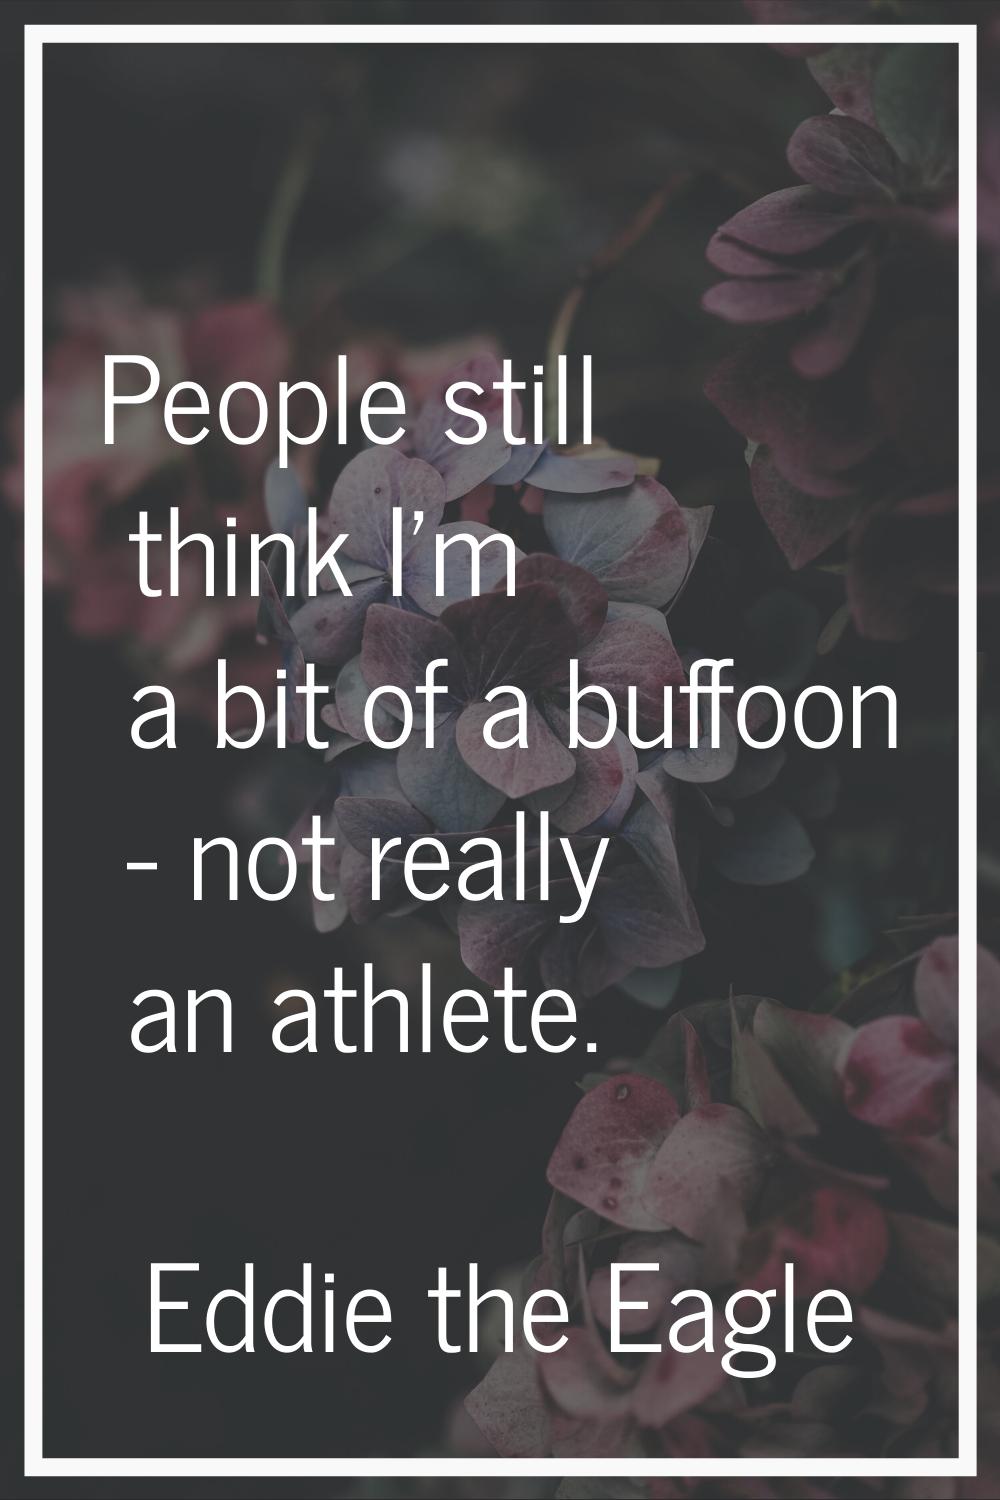 People still think I'm a bit of a buffoon - not really an athlete.